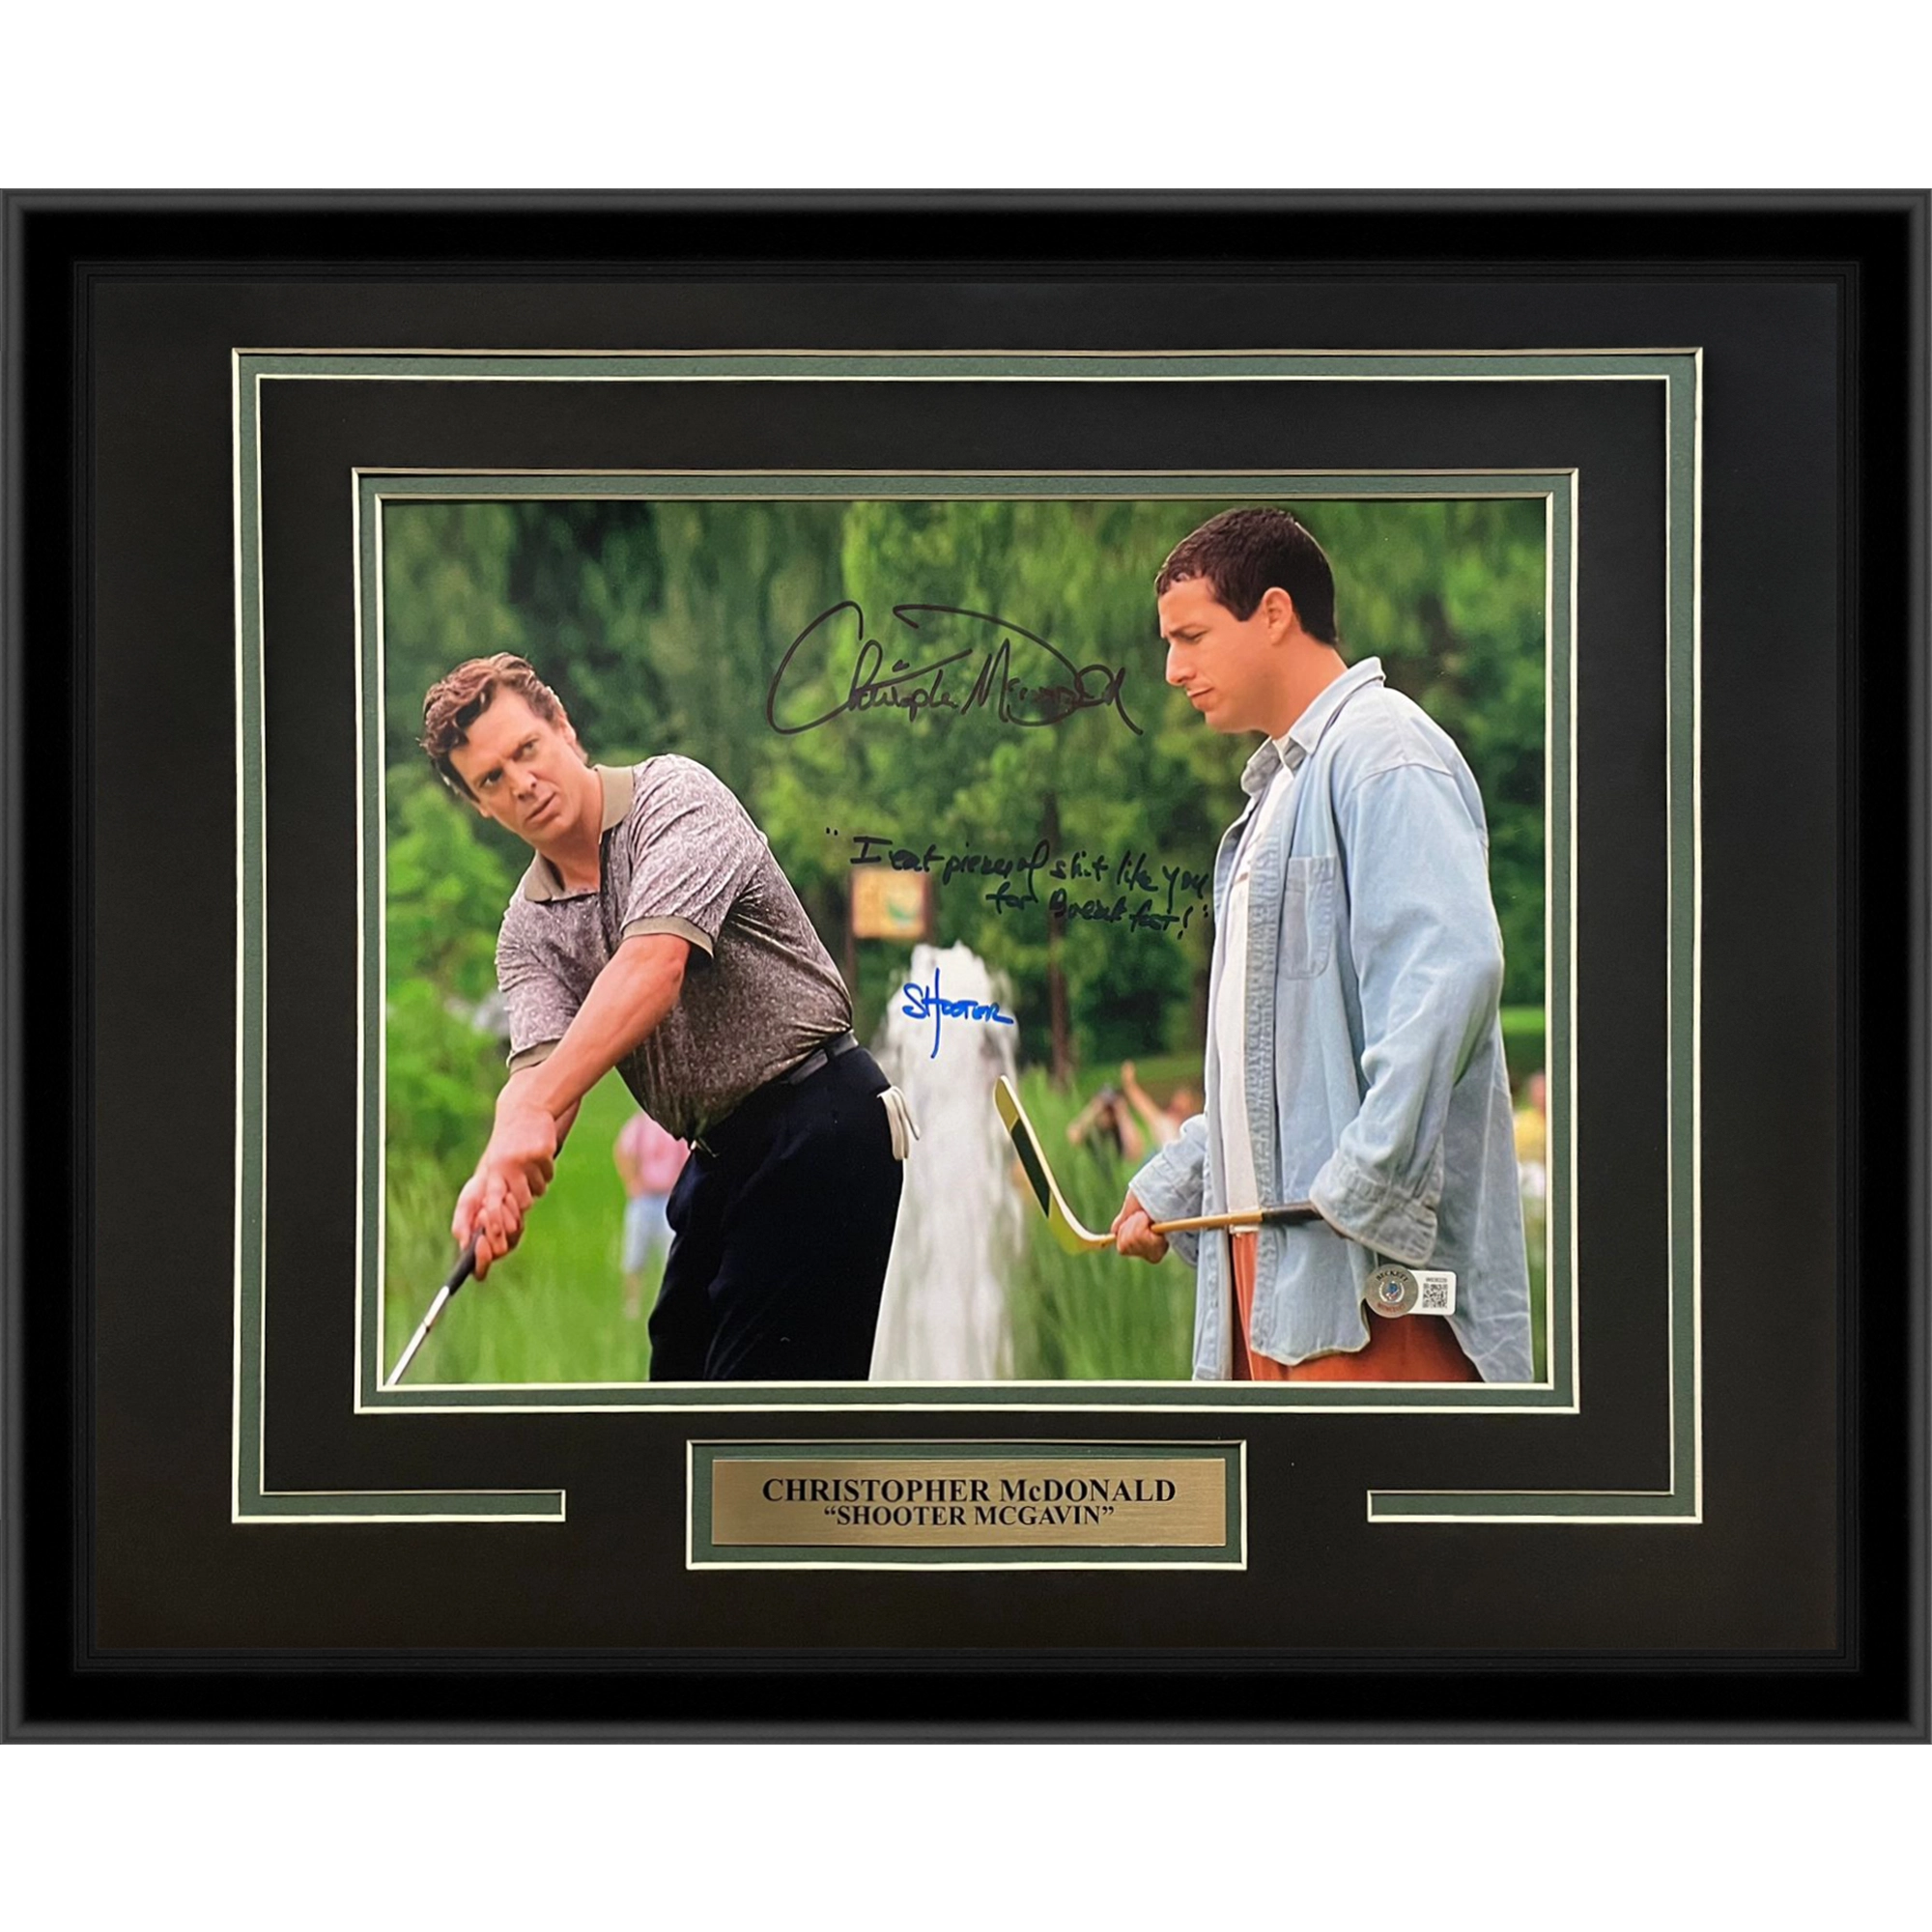 Christopher McDonald Shooter McGavin Autographed Happy Gilmore Deluxe Framed 11x14 Photo w/ Long Quote (Signed in Blue) - Beckett